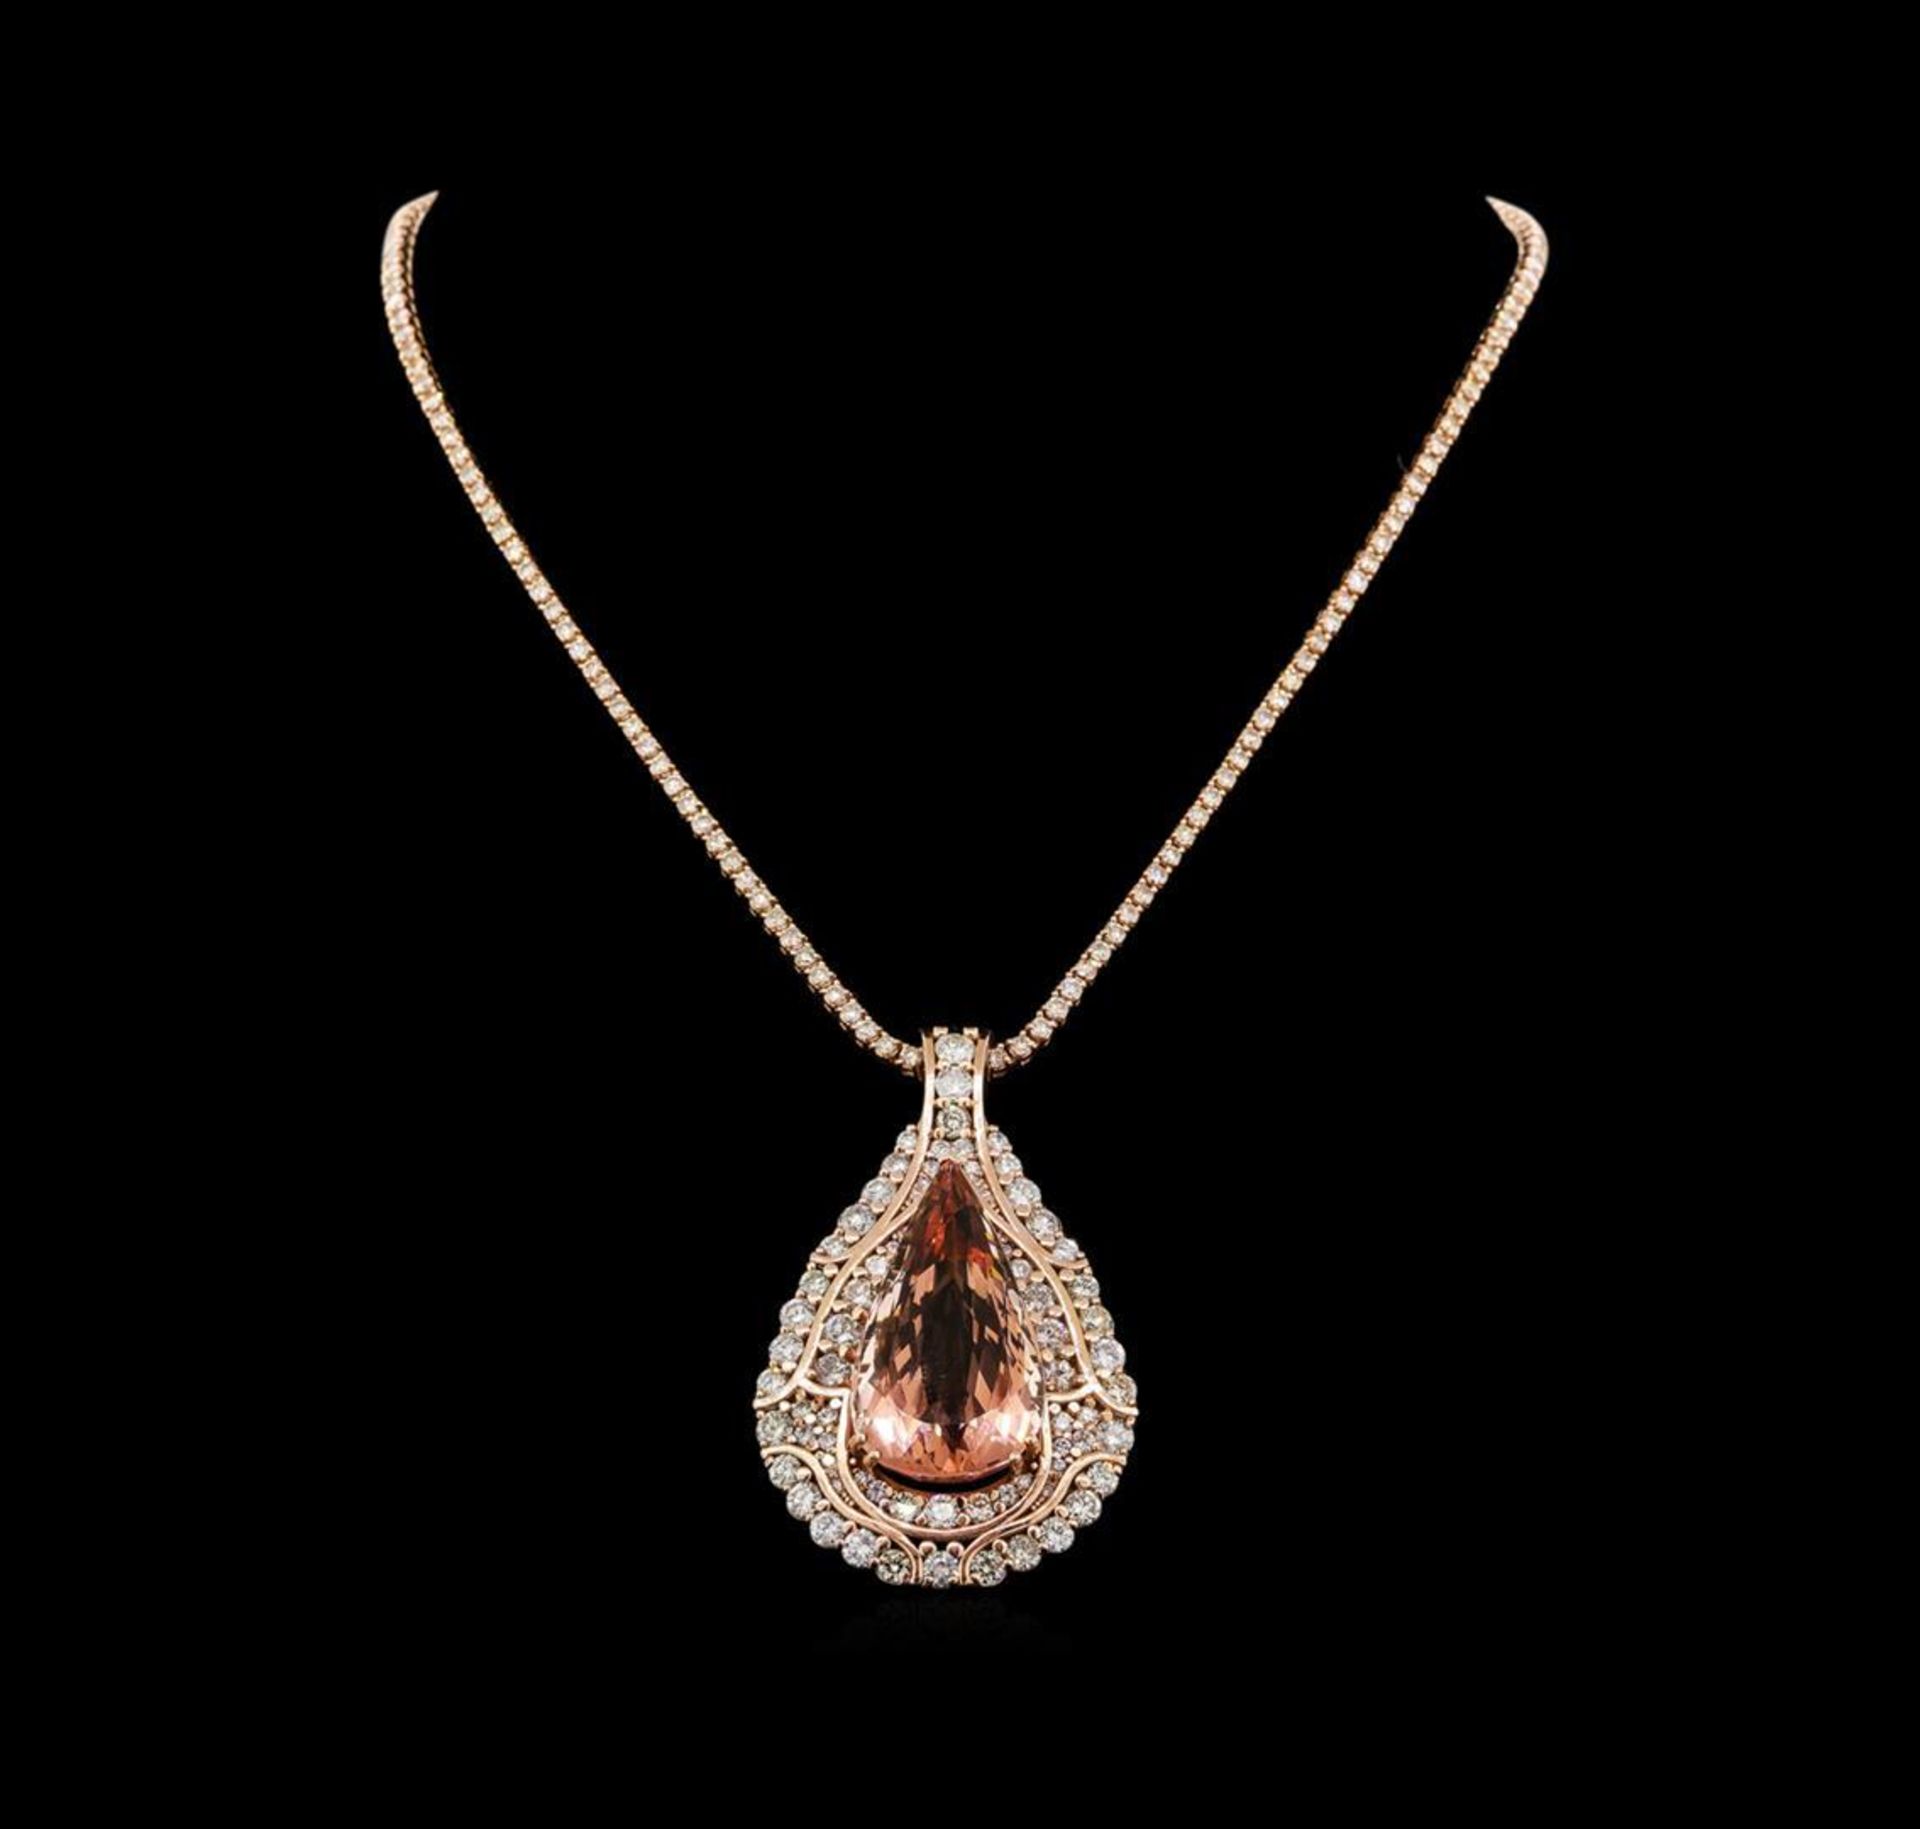 14KT Rose Gold GIA Certified 49.49 ctw Morganite and Diamond Pendant With Chain - Image 2 of 4